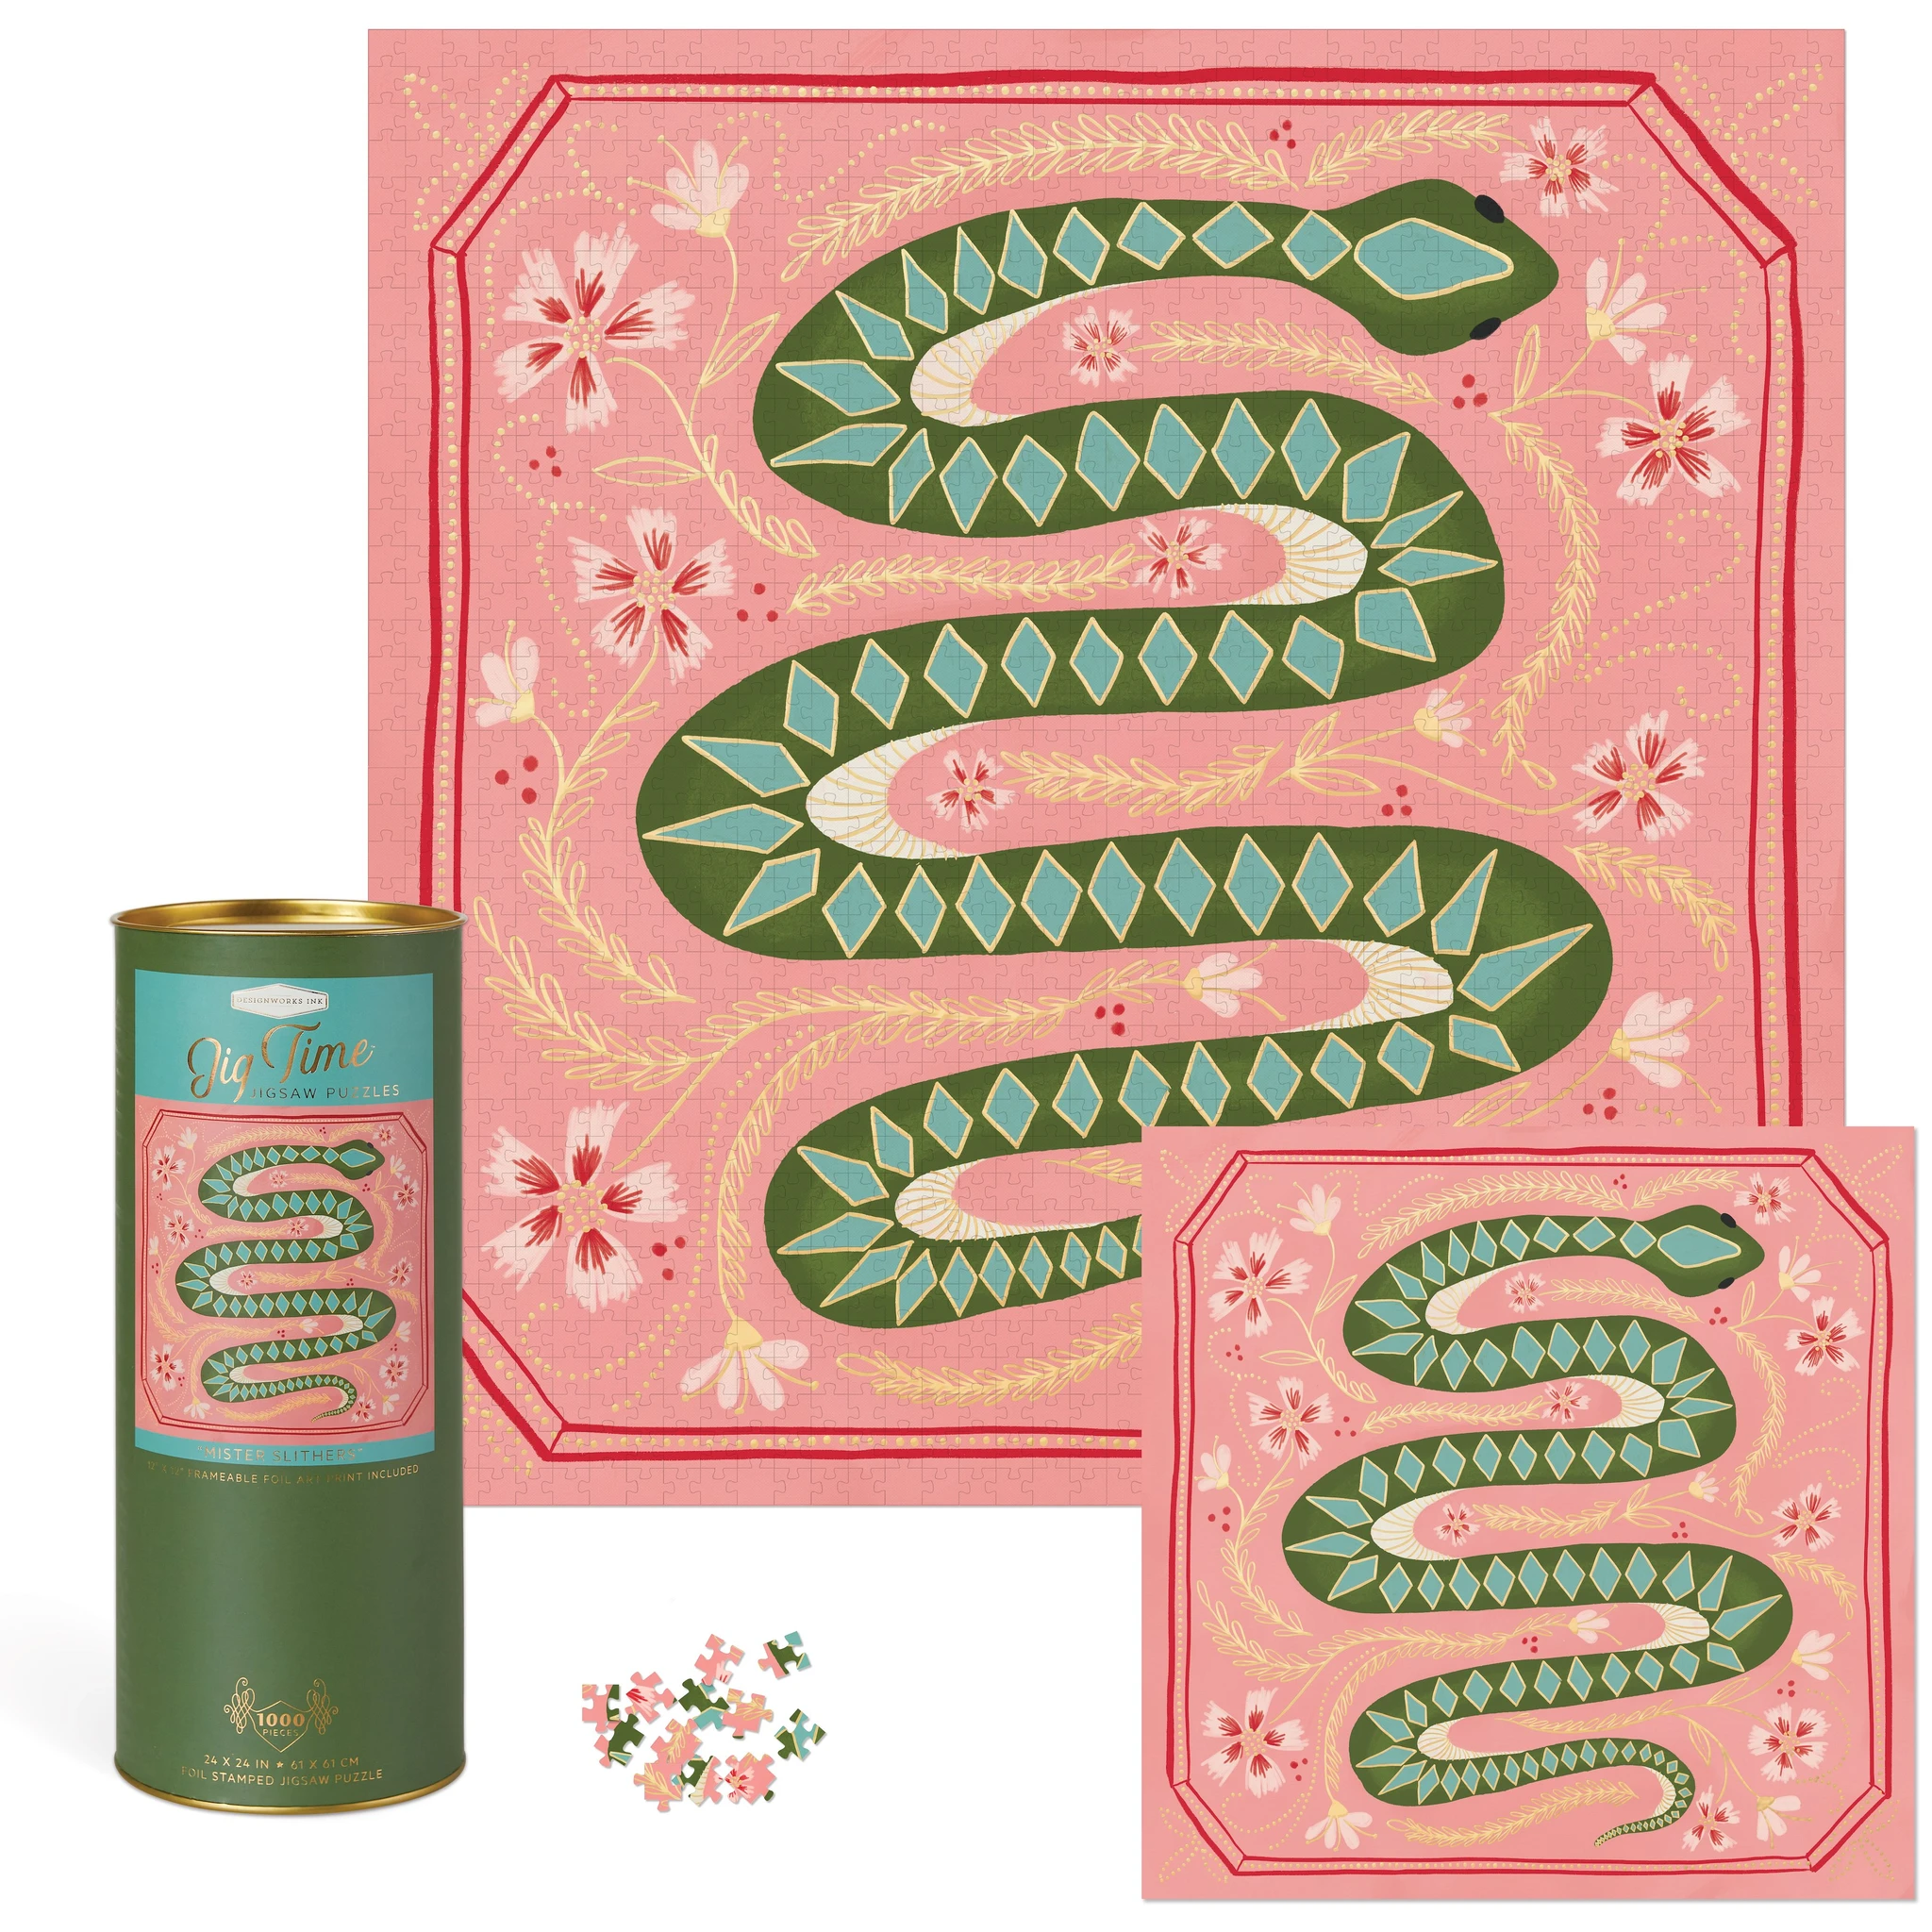 Groovy Mister Slithers 1000 pc Puzzle